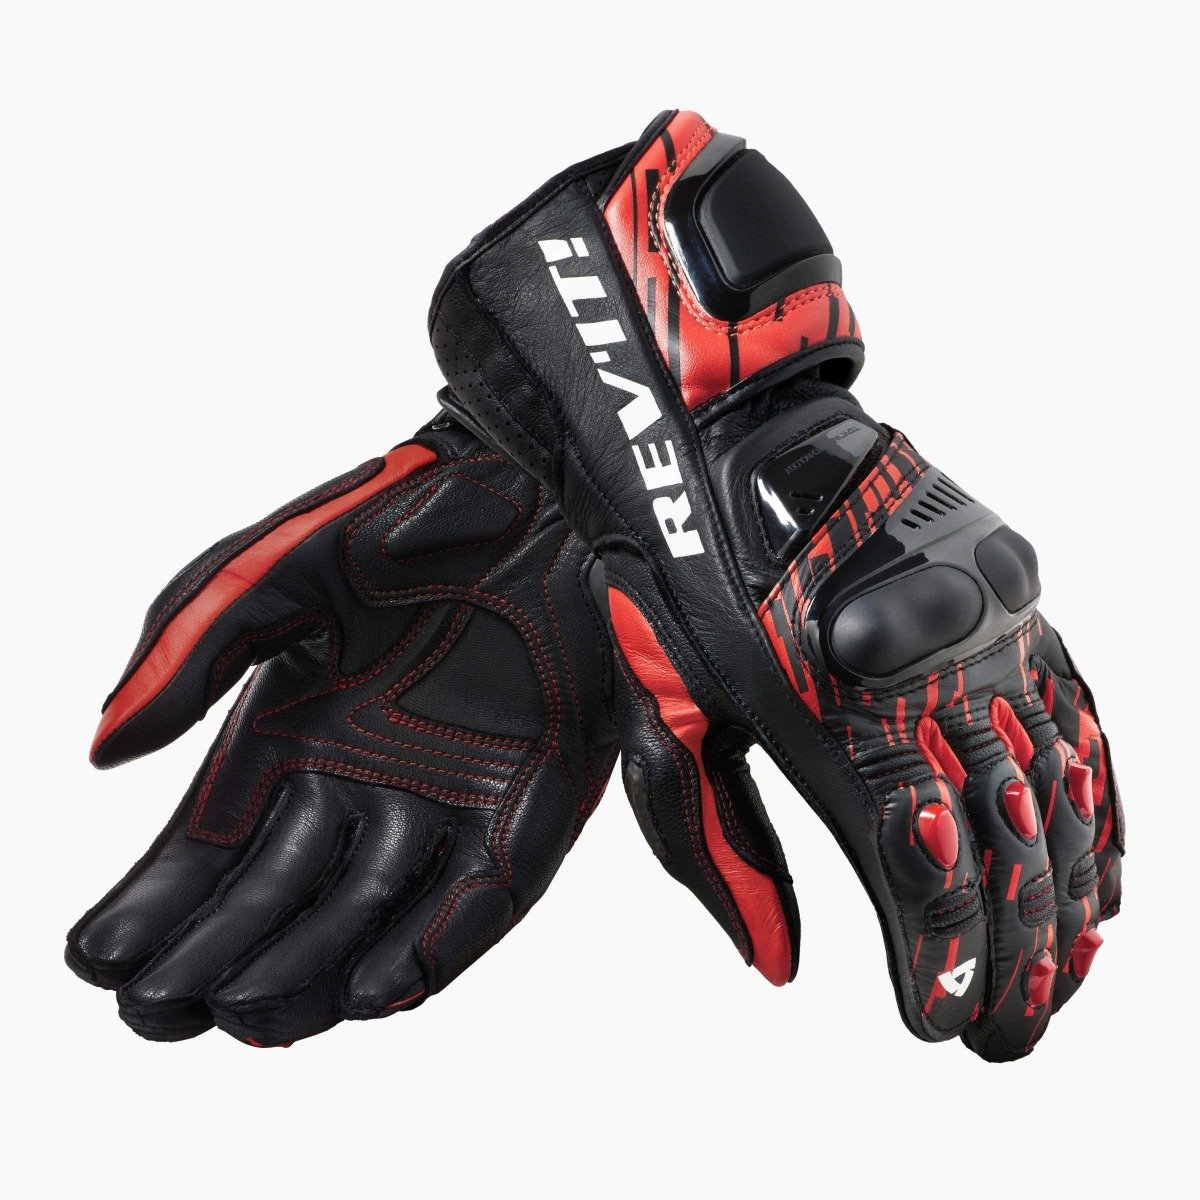 Image of REV'IT! Quantum 2 Neon Red Black Motorcycle Gloves Size 2XL ID 8700001308816